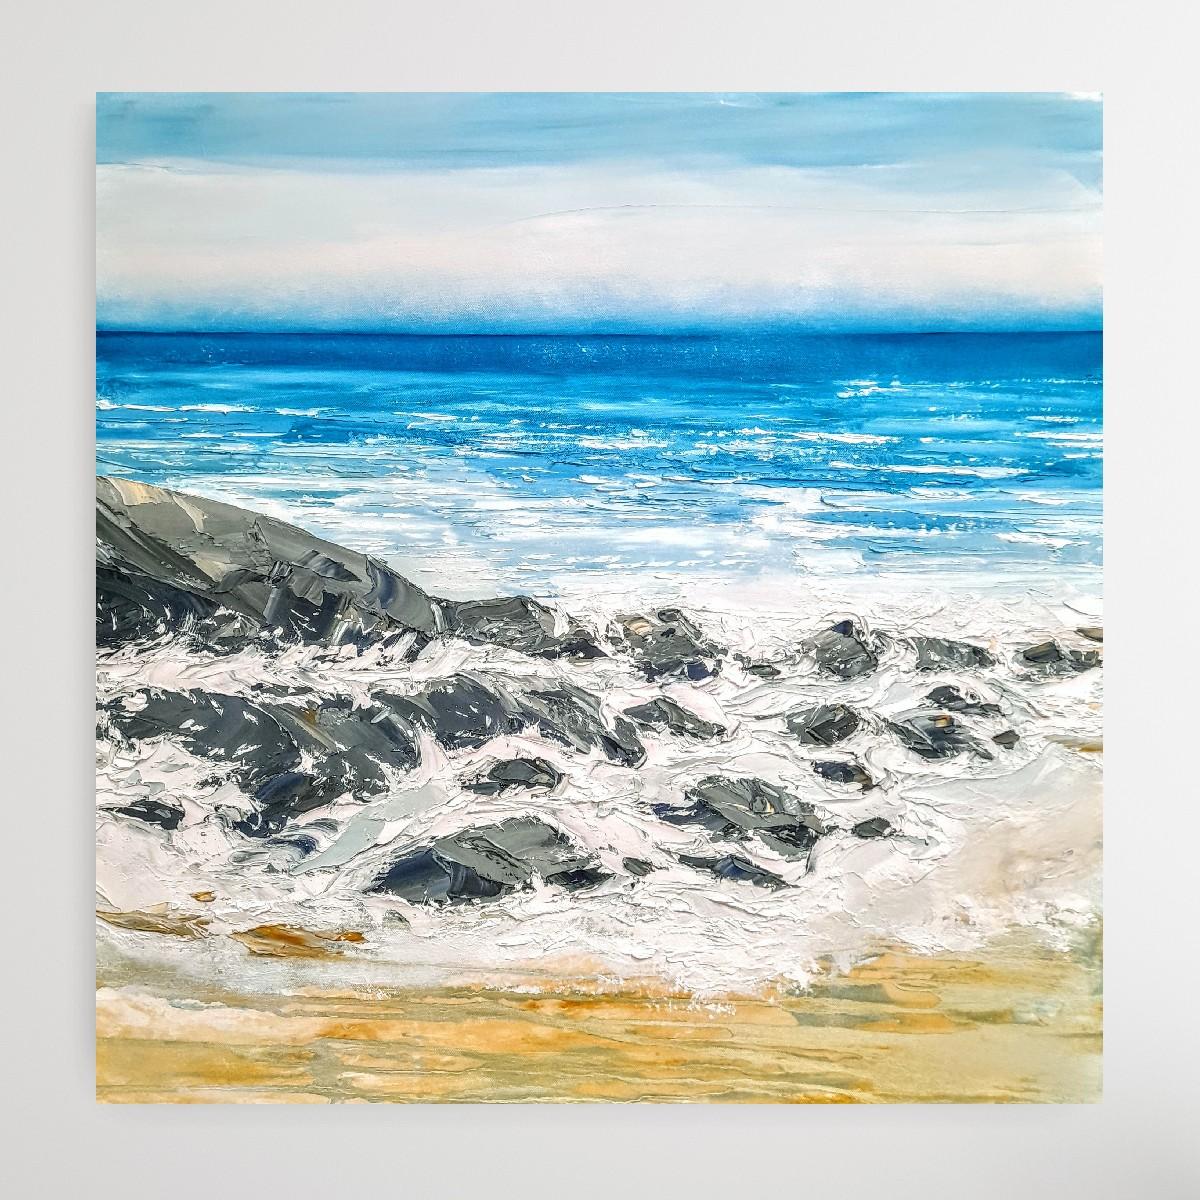 A Summer On The Cornish Coast Inspired by days sat on the North Cornwall coastline watching the changing tide crashing over the rocks. The bright blue sea typical of the area sparkles in the distance. The way the pattern of rocks continues to evolve